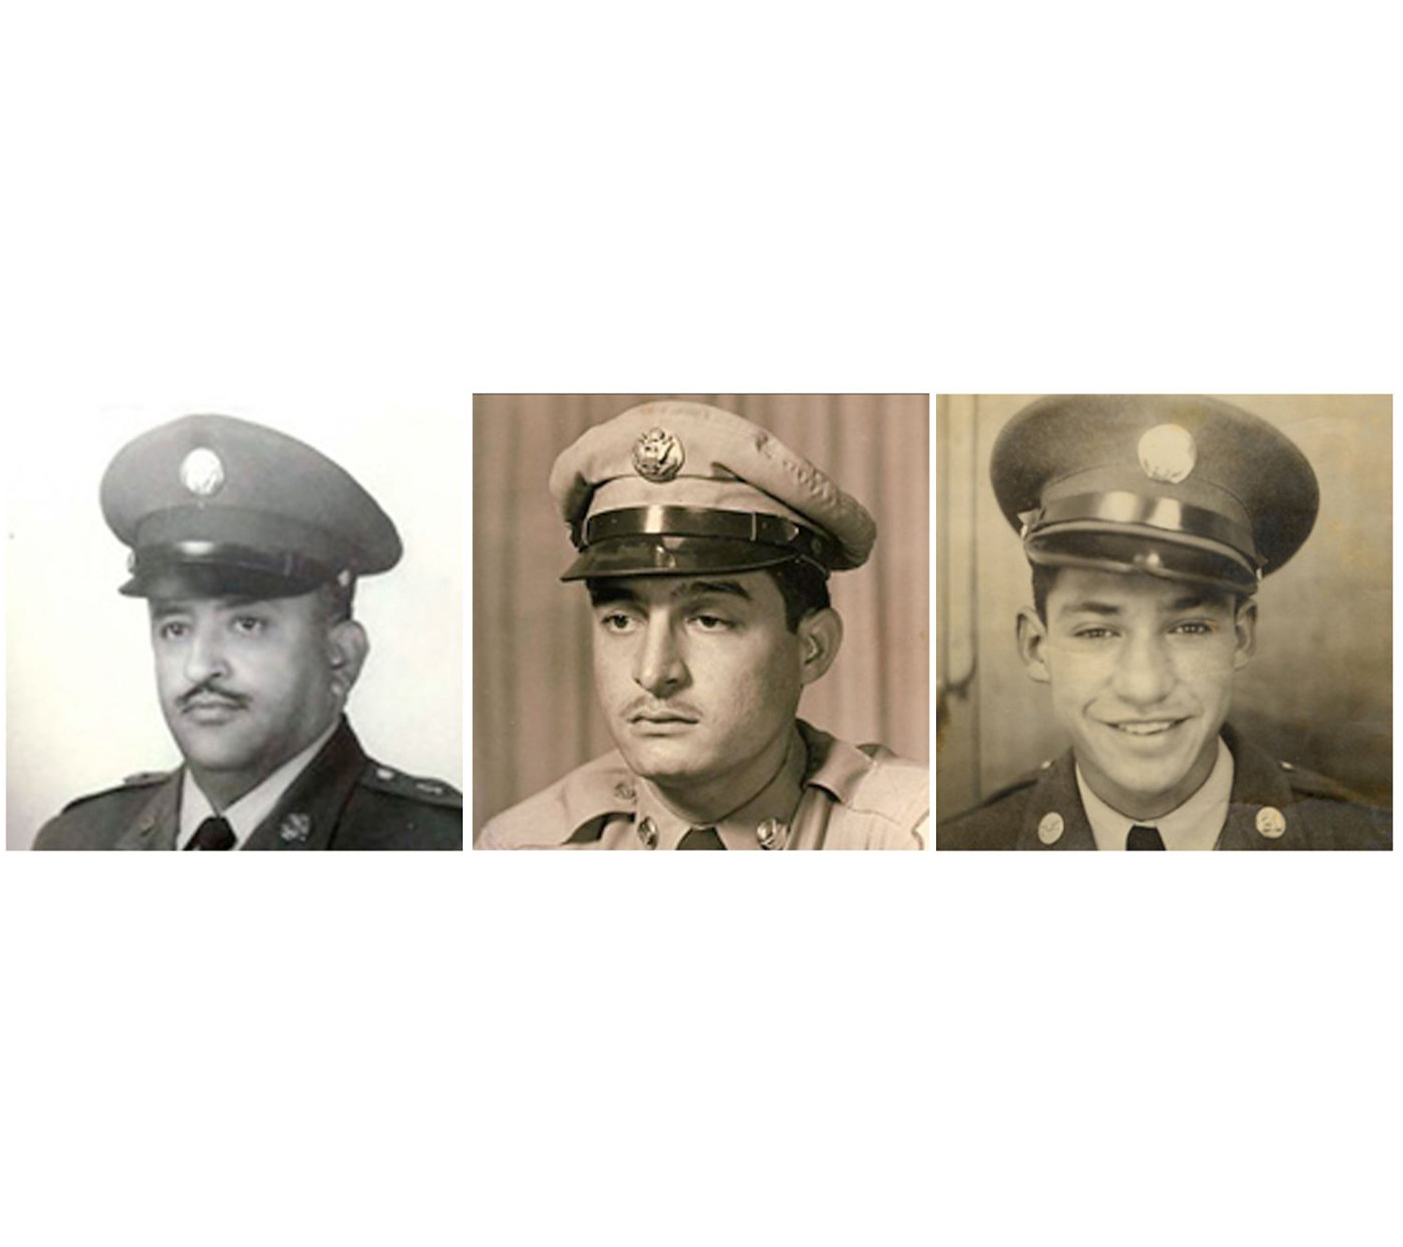 These images provided by the U.S. Army show Korean War veterans, from left, Sgt. 1st Class Eduardo Corral Gomez, Master Sgt. Juan E. Negron and Master Sgt. Mike C. Pena, who are among 24 minority veterans receiving the Medal of Honor.